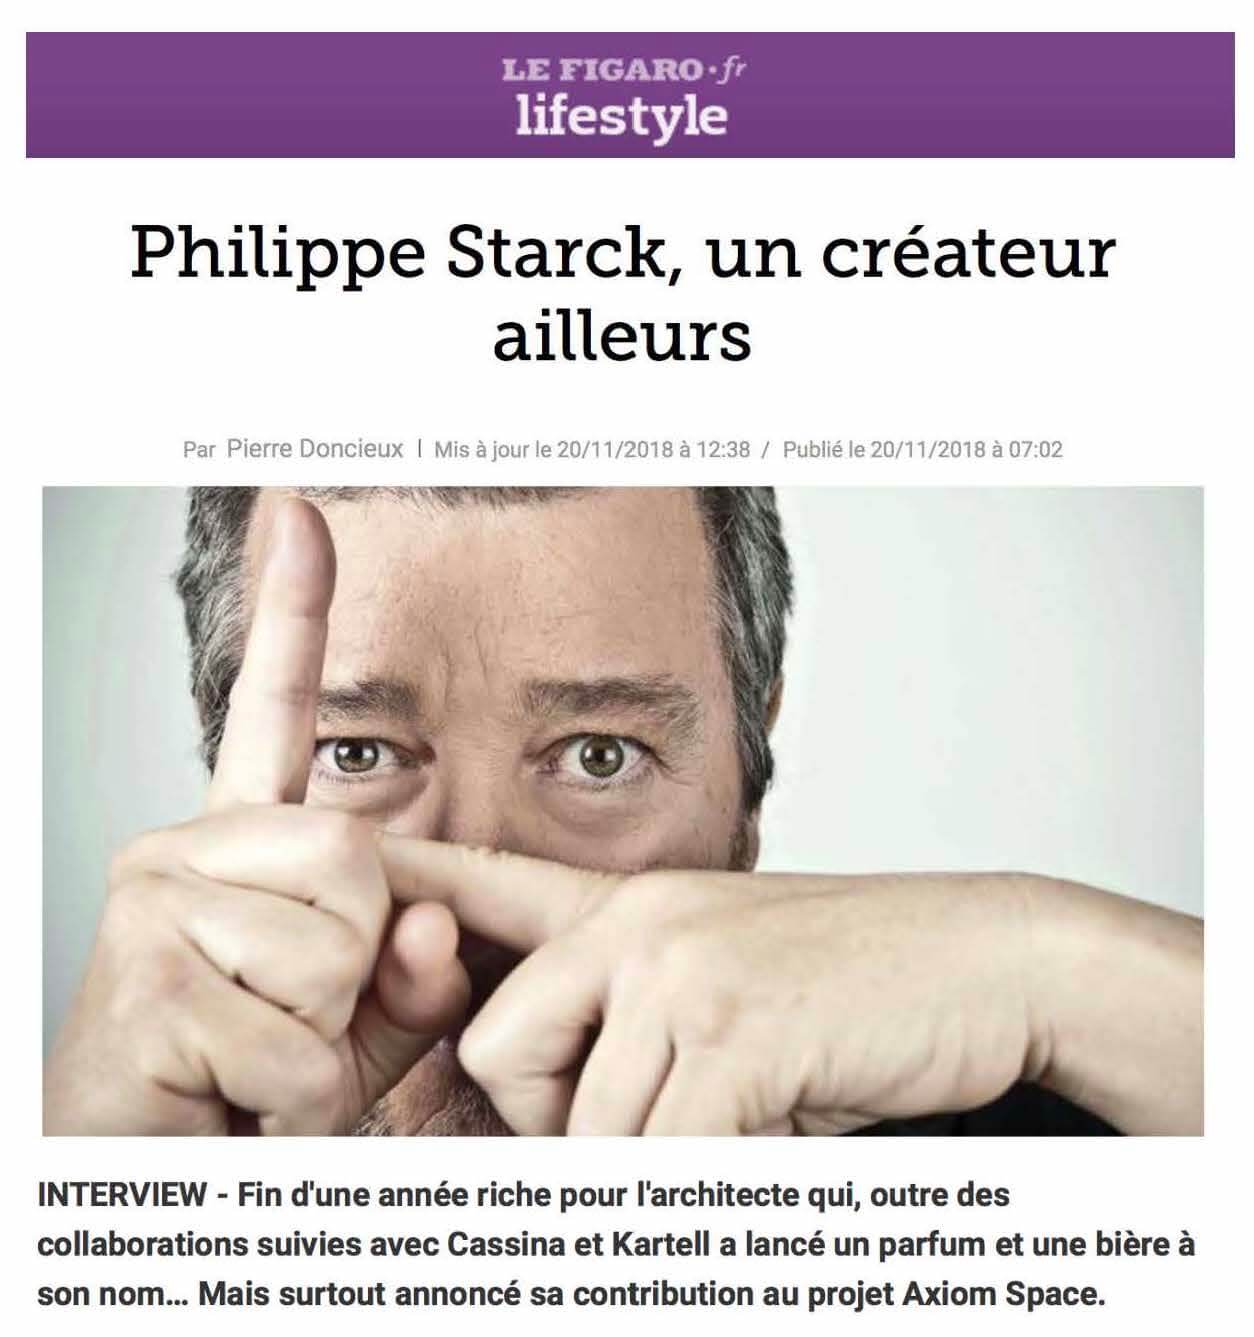 Philippe Starck , a creator from elsewhere